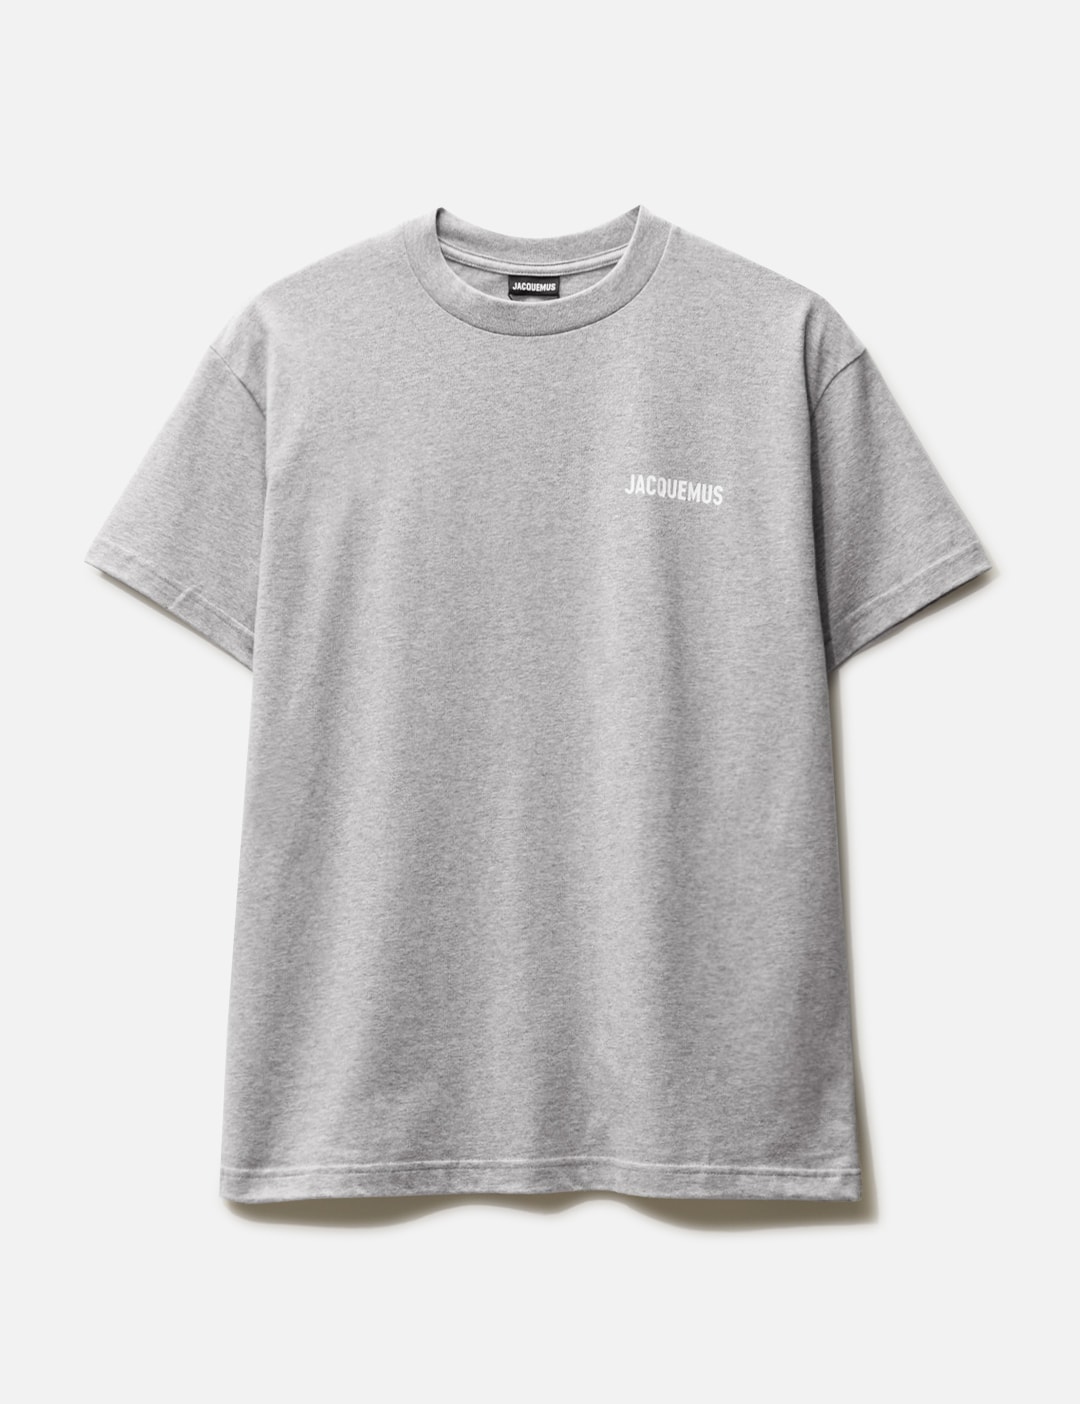 Jacquemus - Jacquemus T-shirt | HBX - Globally Curated Fashion and ...